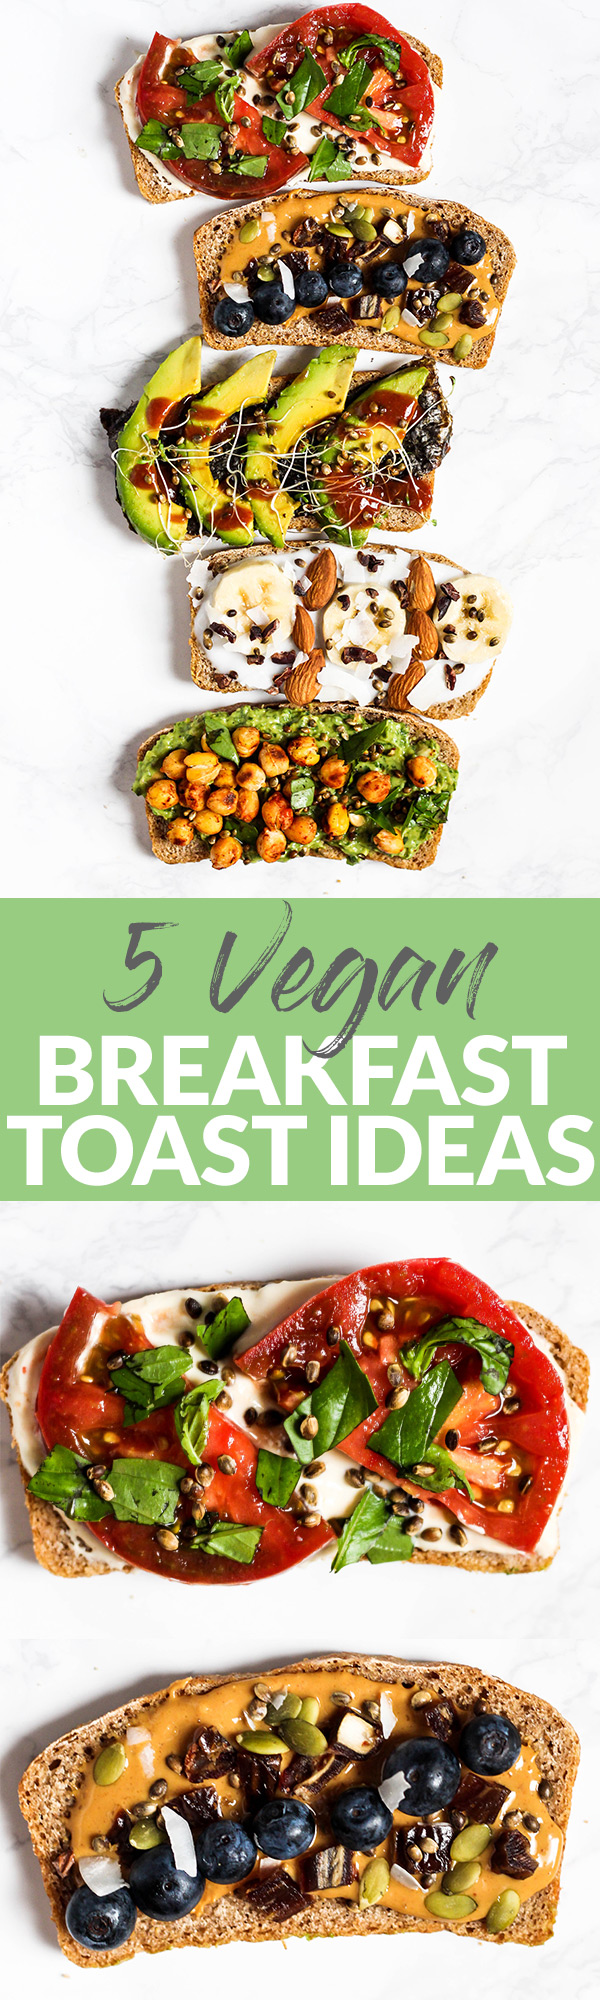 Amp up your plain piece of toast with these 5 Vegan Breakfast Toast Ideas! With both sweet & savory options, there’s a toast creation perfect for any craving. (can be gluten-free)